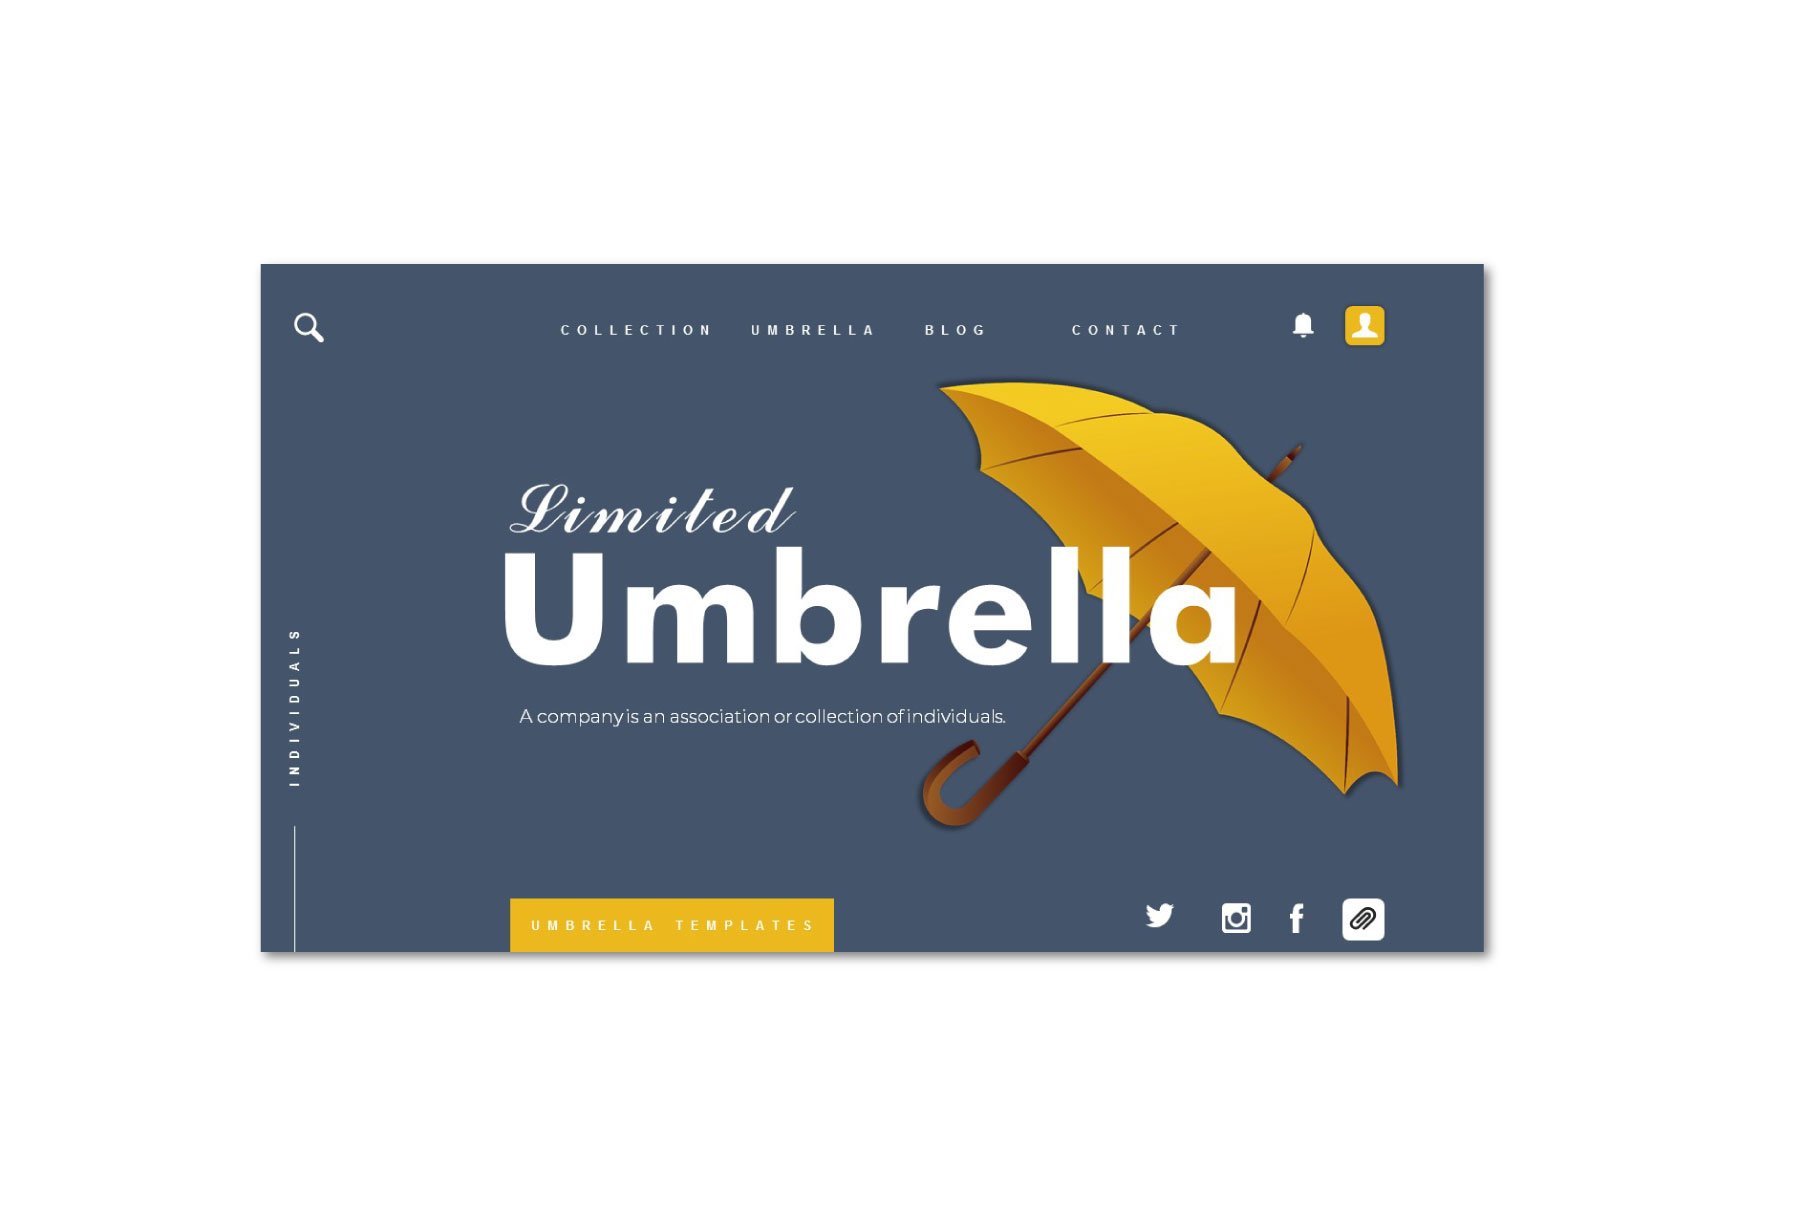 Matte grey background with a yellow umbrella and white bold title font.